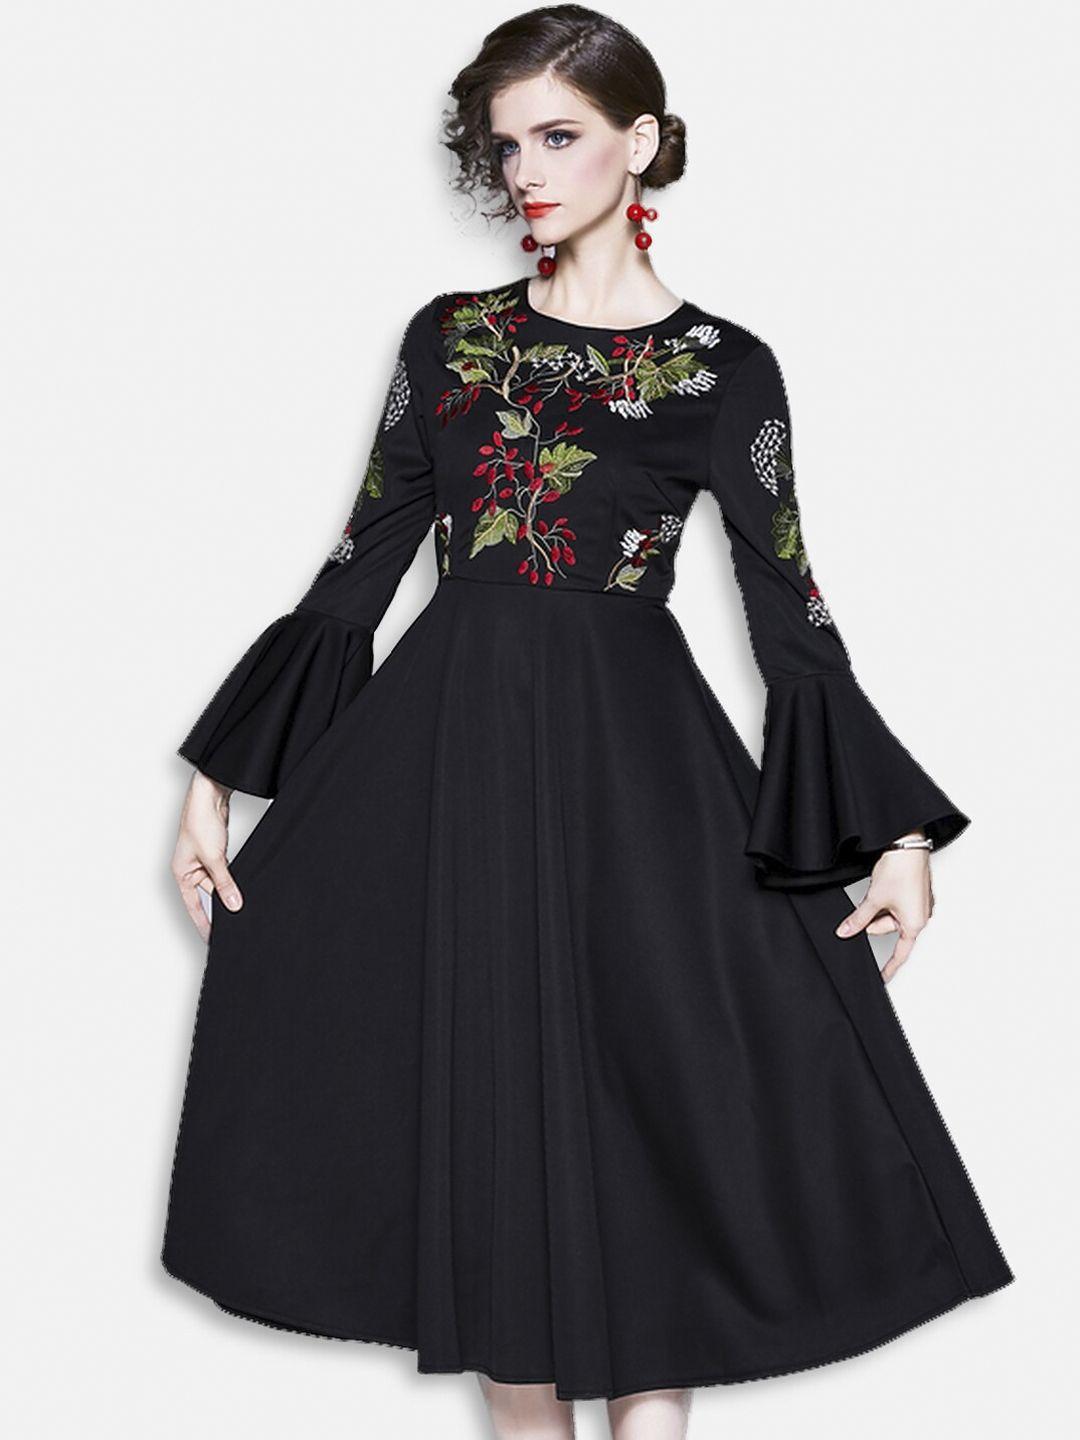 jc collection women black floral embroidered dress